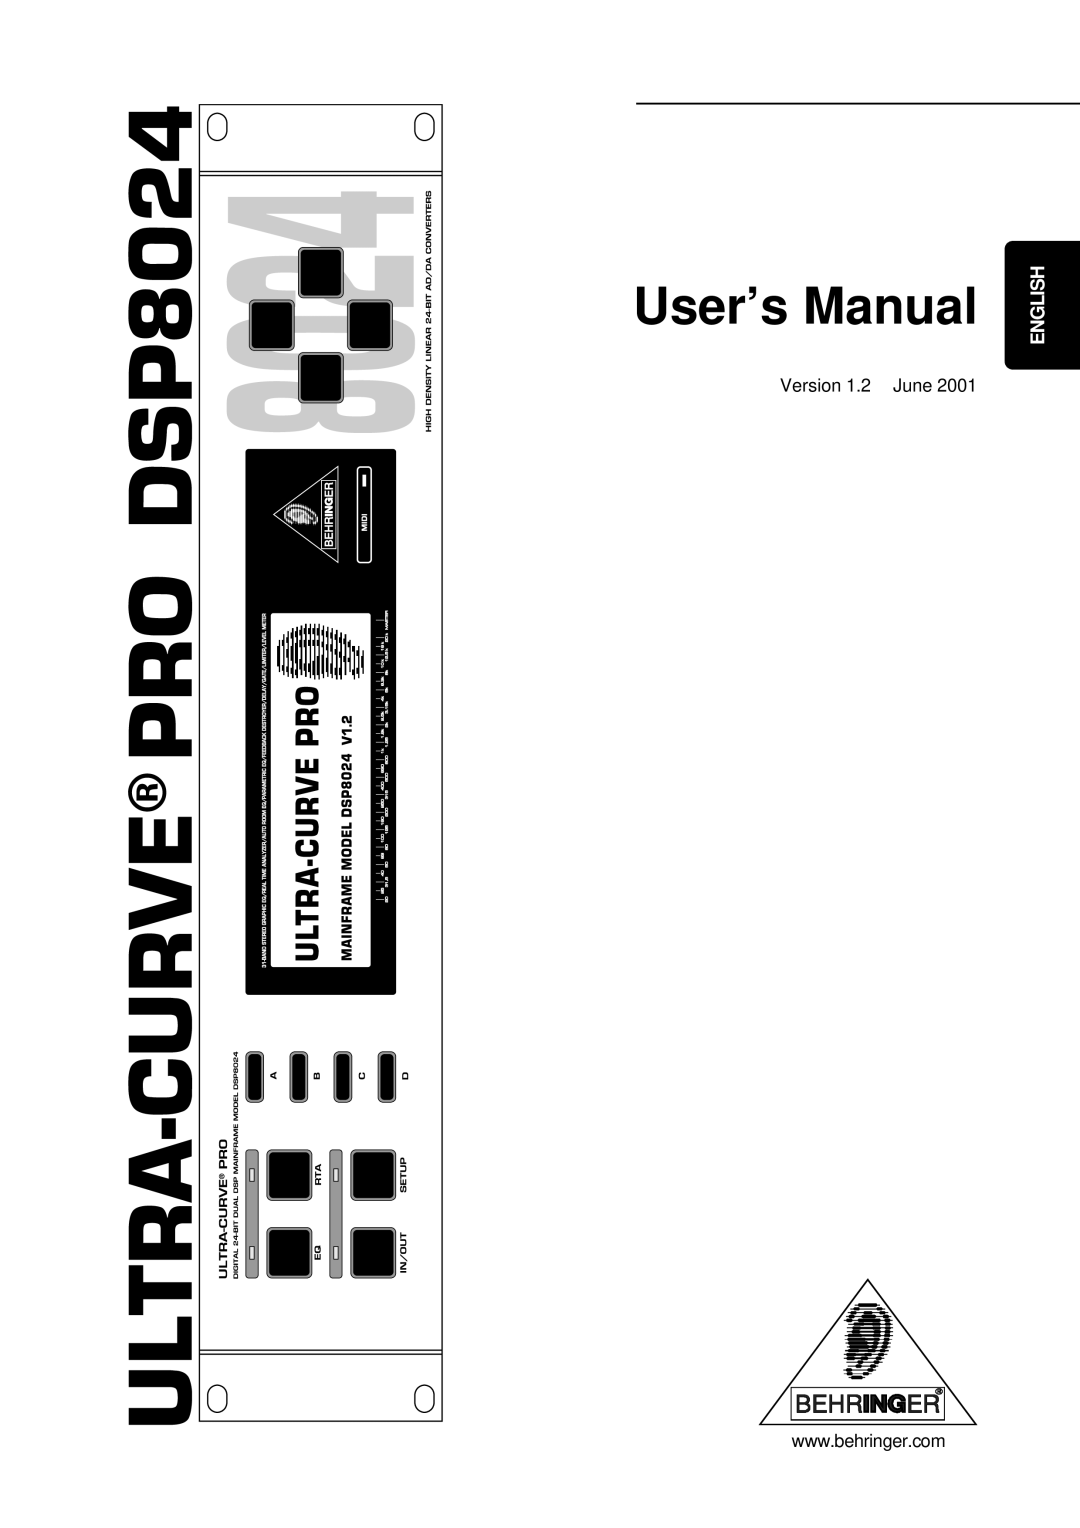 Behringer user manual User’s Manual, English, ULTRA-CURVE PRO DSP8024 